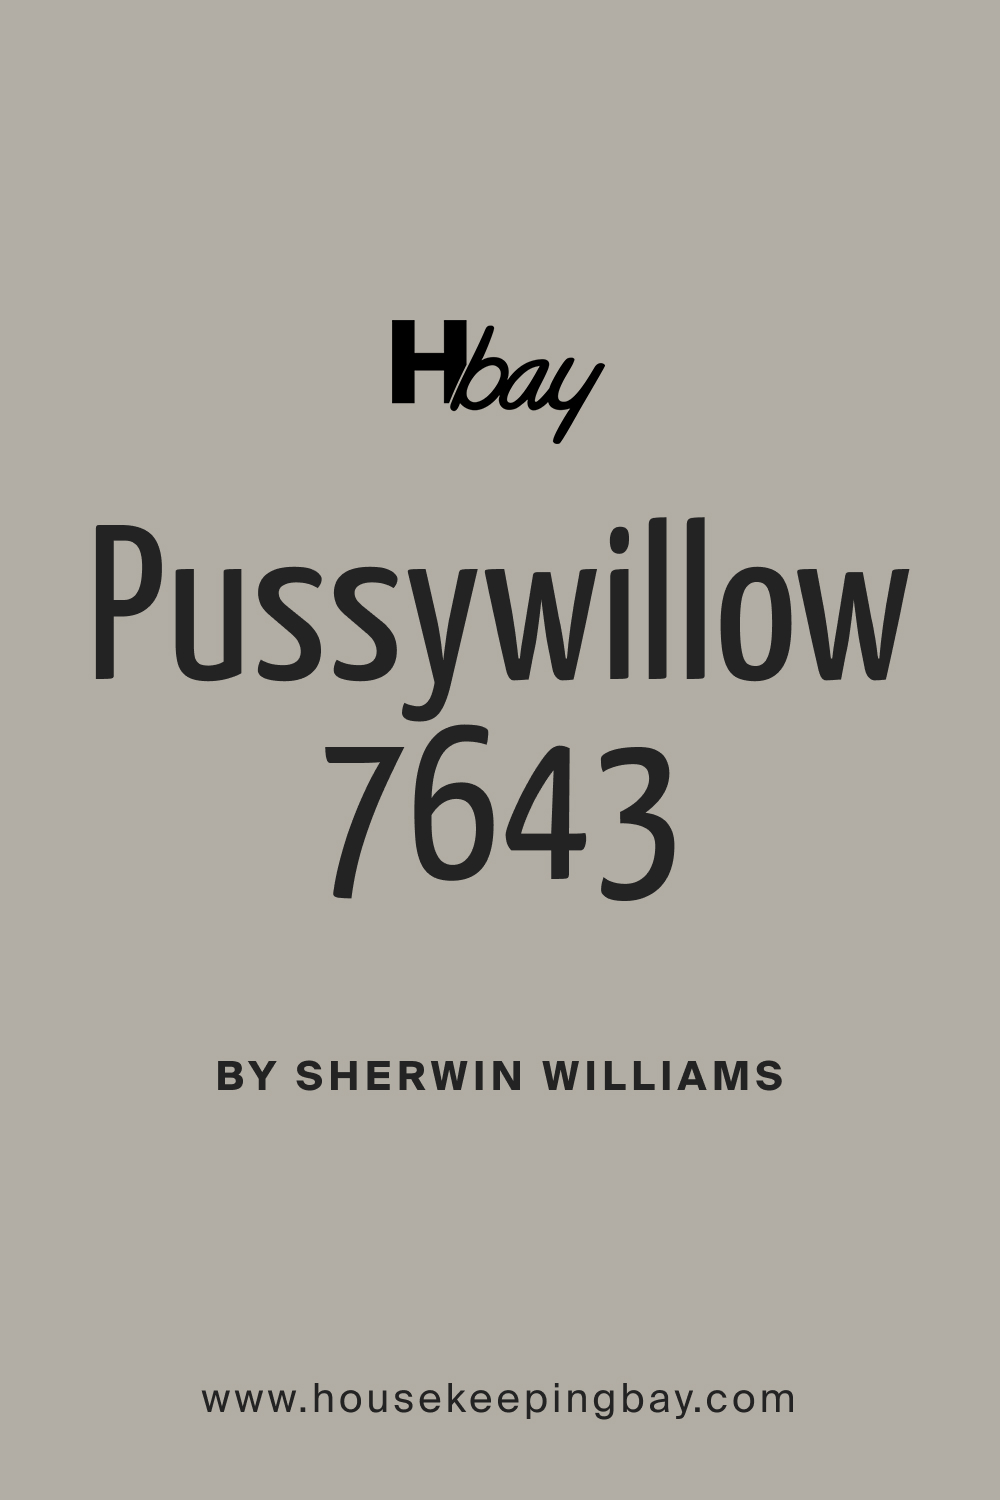 Pussywillow SW 7643 Paint Color by Sherwin Williams